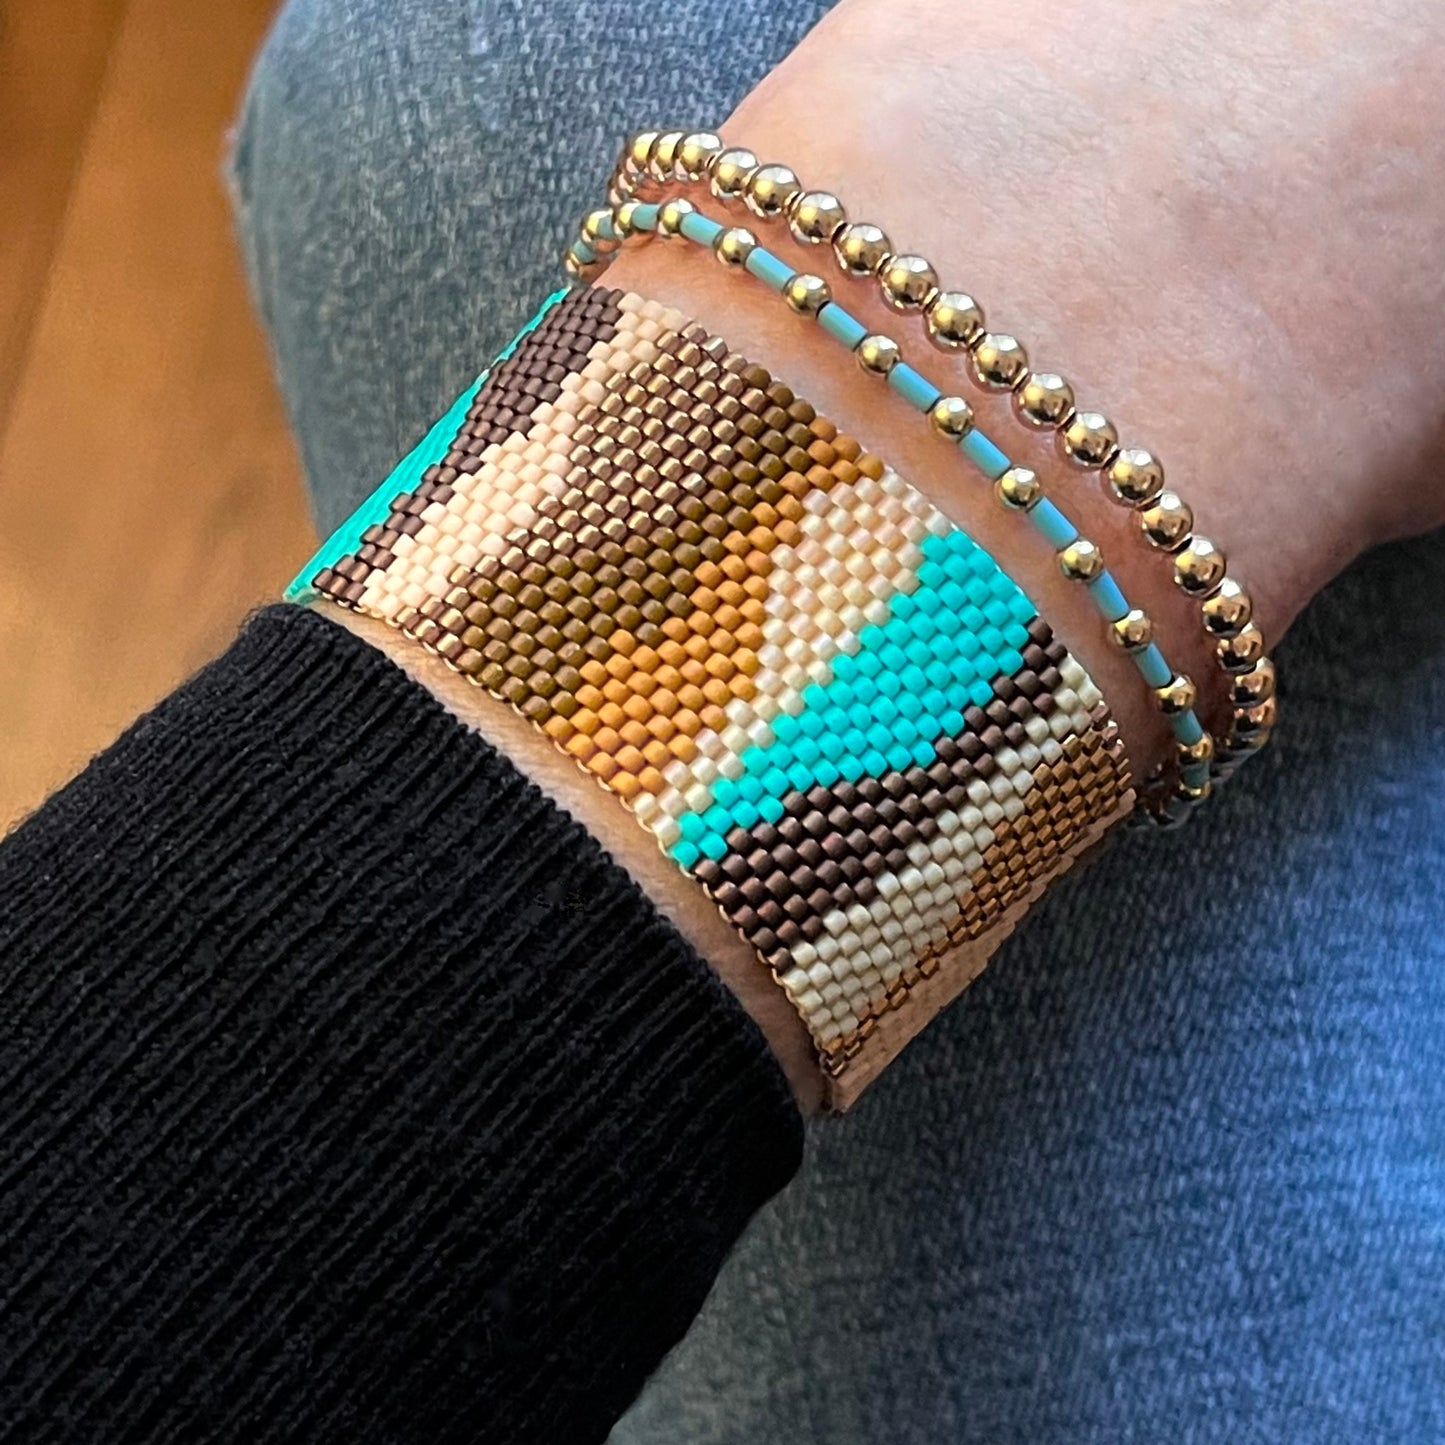 Aqua turquoise and tan camo bracelet stack with beaded woven band and stretch bracelets with gold-fill and colorful beads.